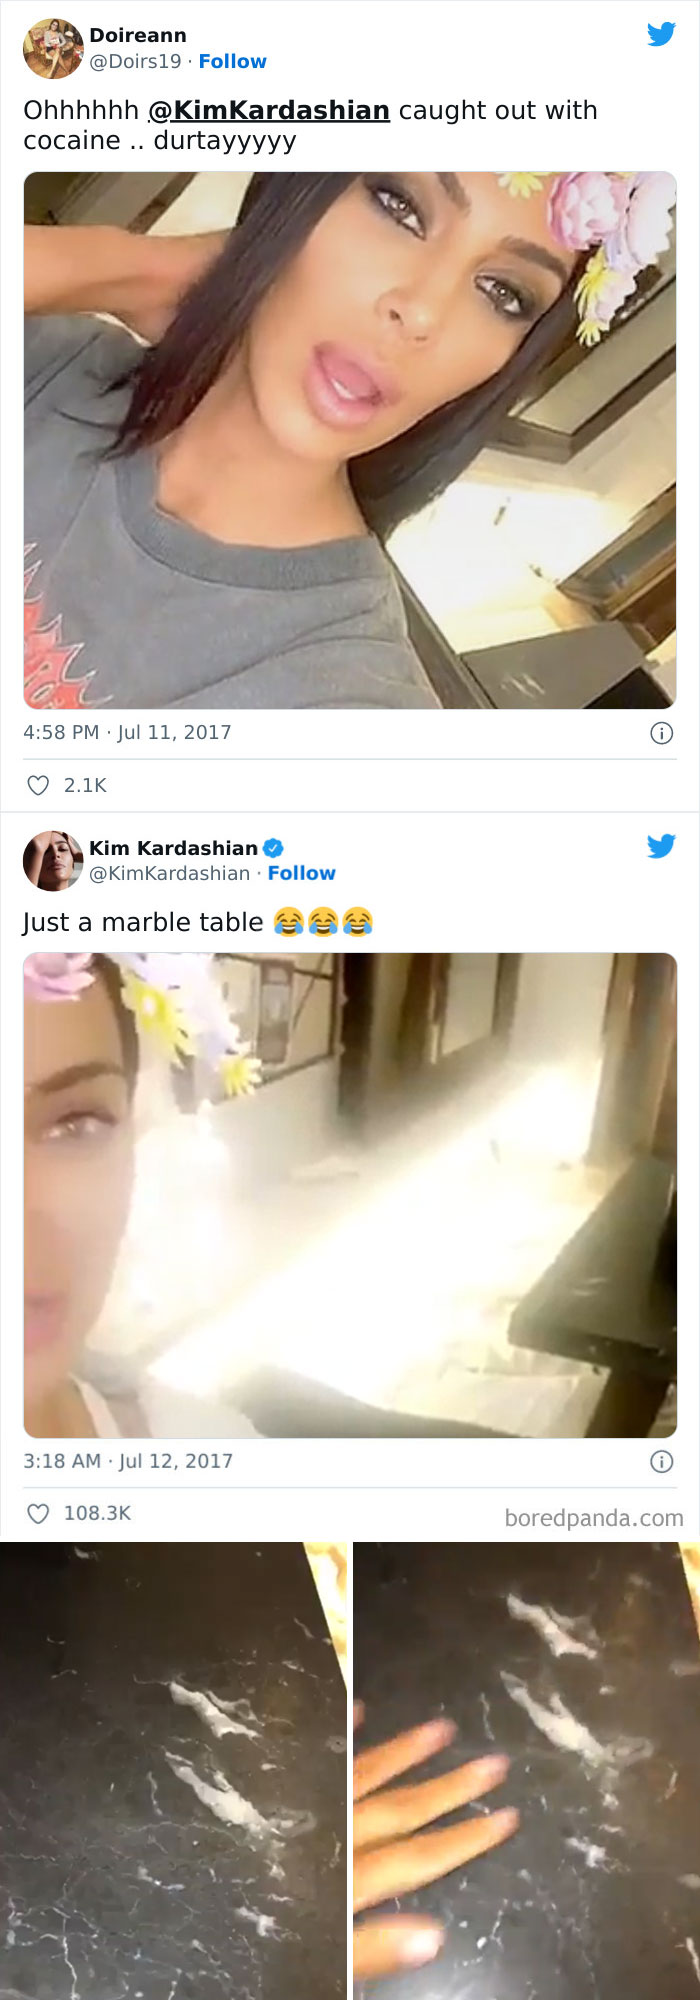 Kim Kardashian's Response To Speculation That She Is Using Cocaine, Saying White Lines Seen On A Table